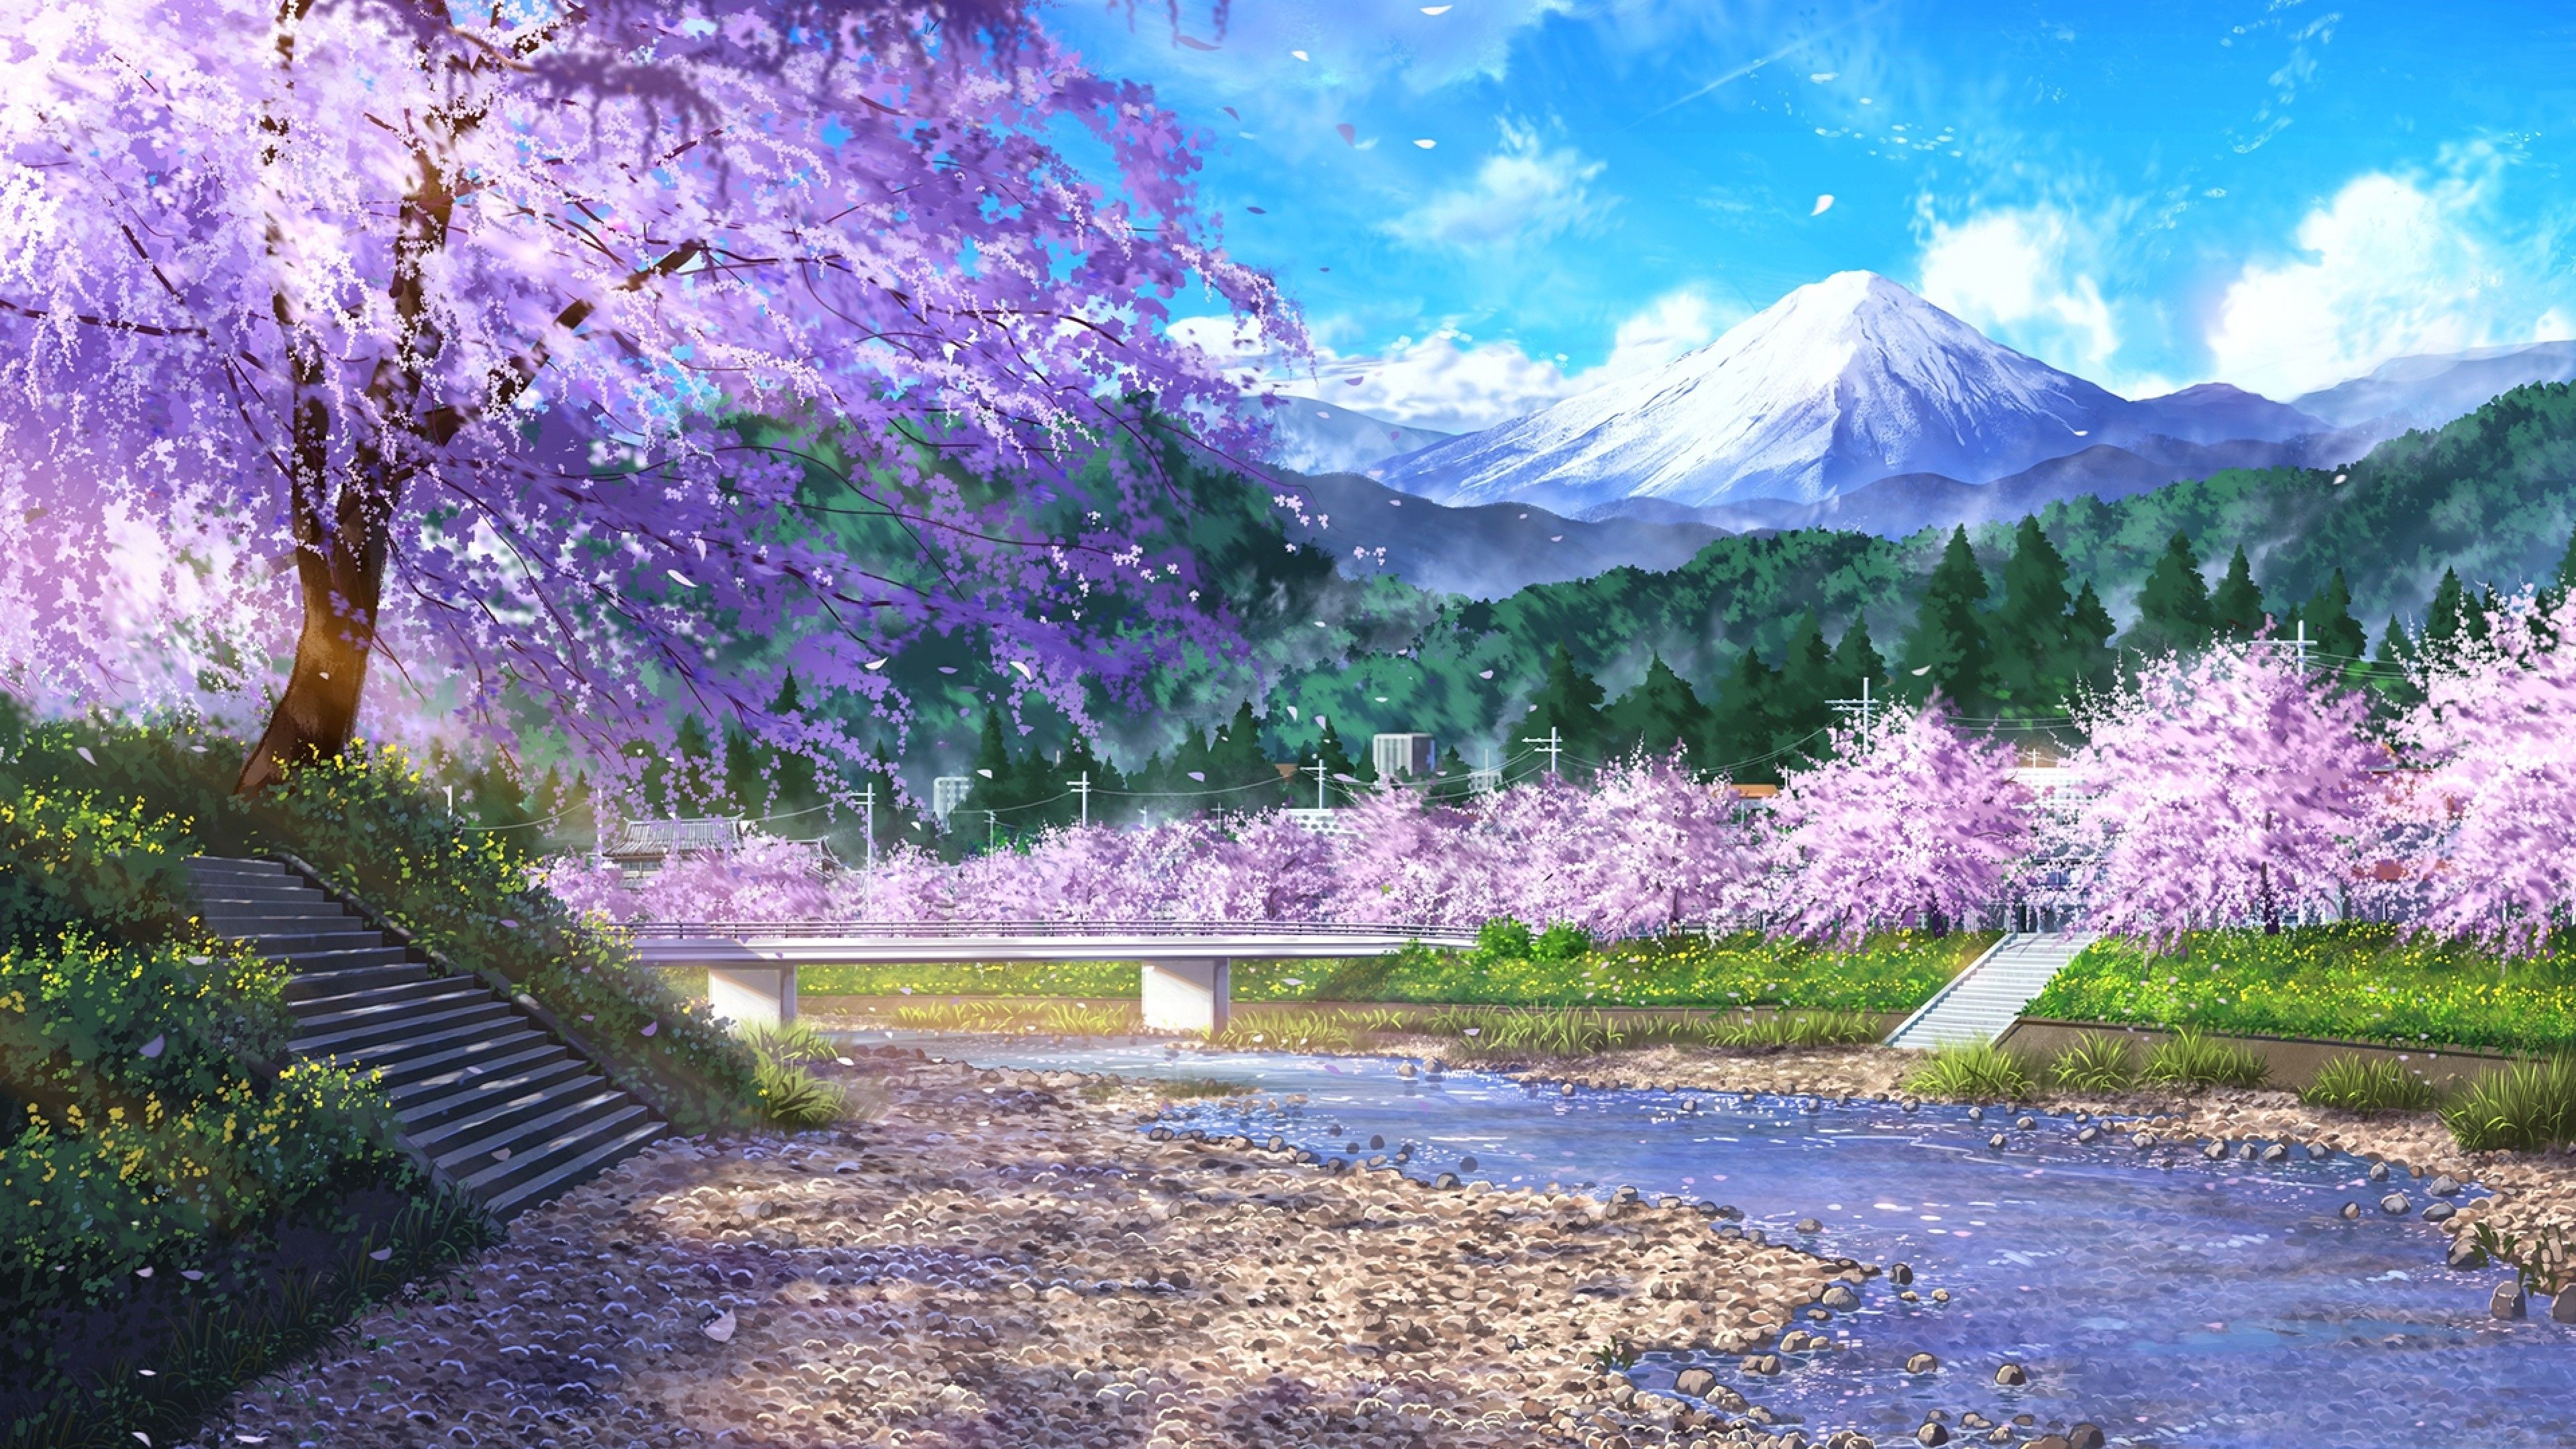 Download 3840x2160 Anime Landscape, Flowers, Scenic, Cherry Blossom, Stairs, River Wallpaper for UHD TV